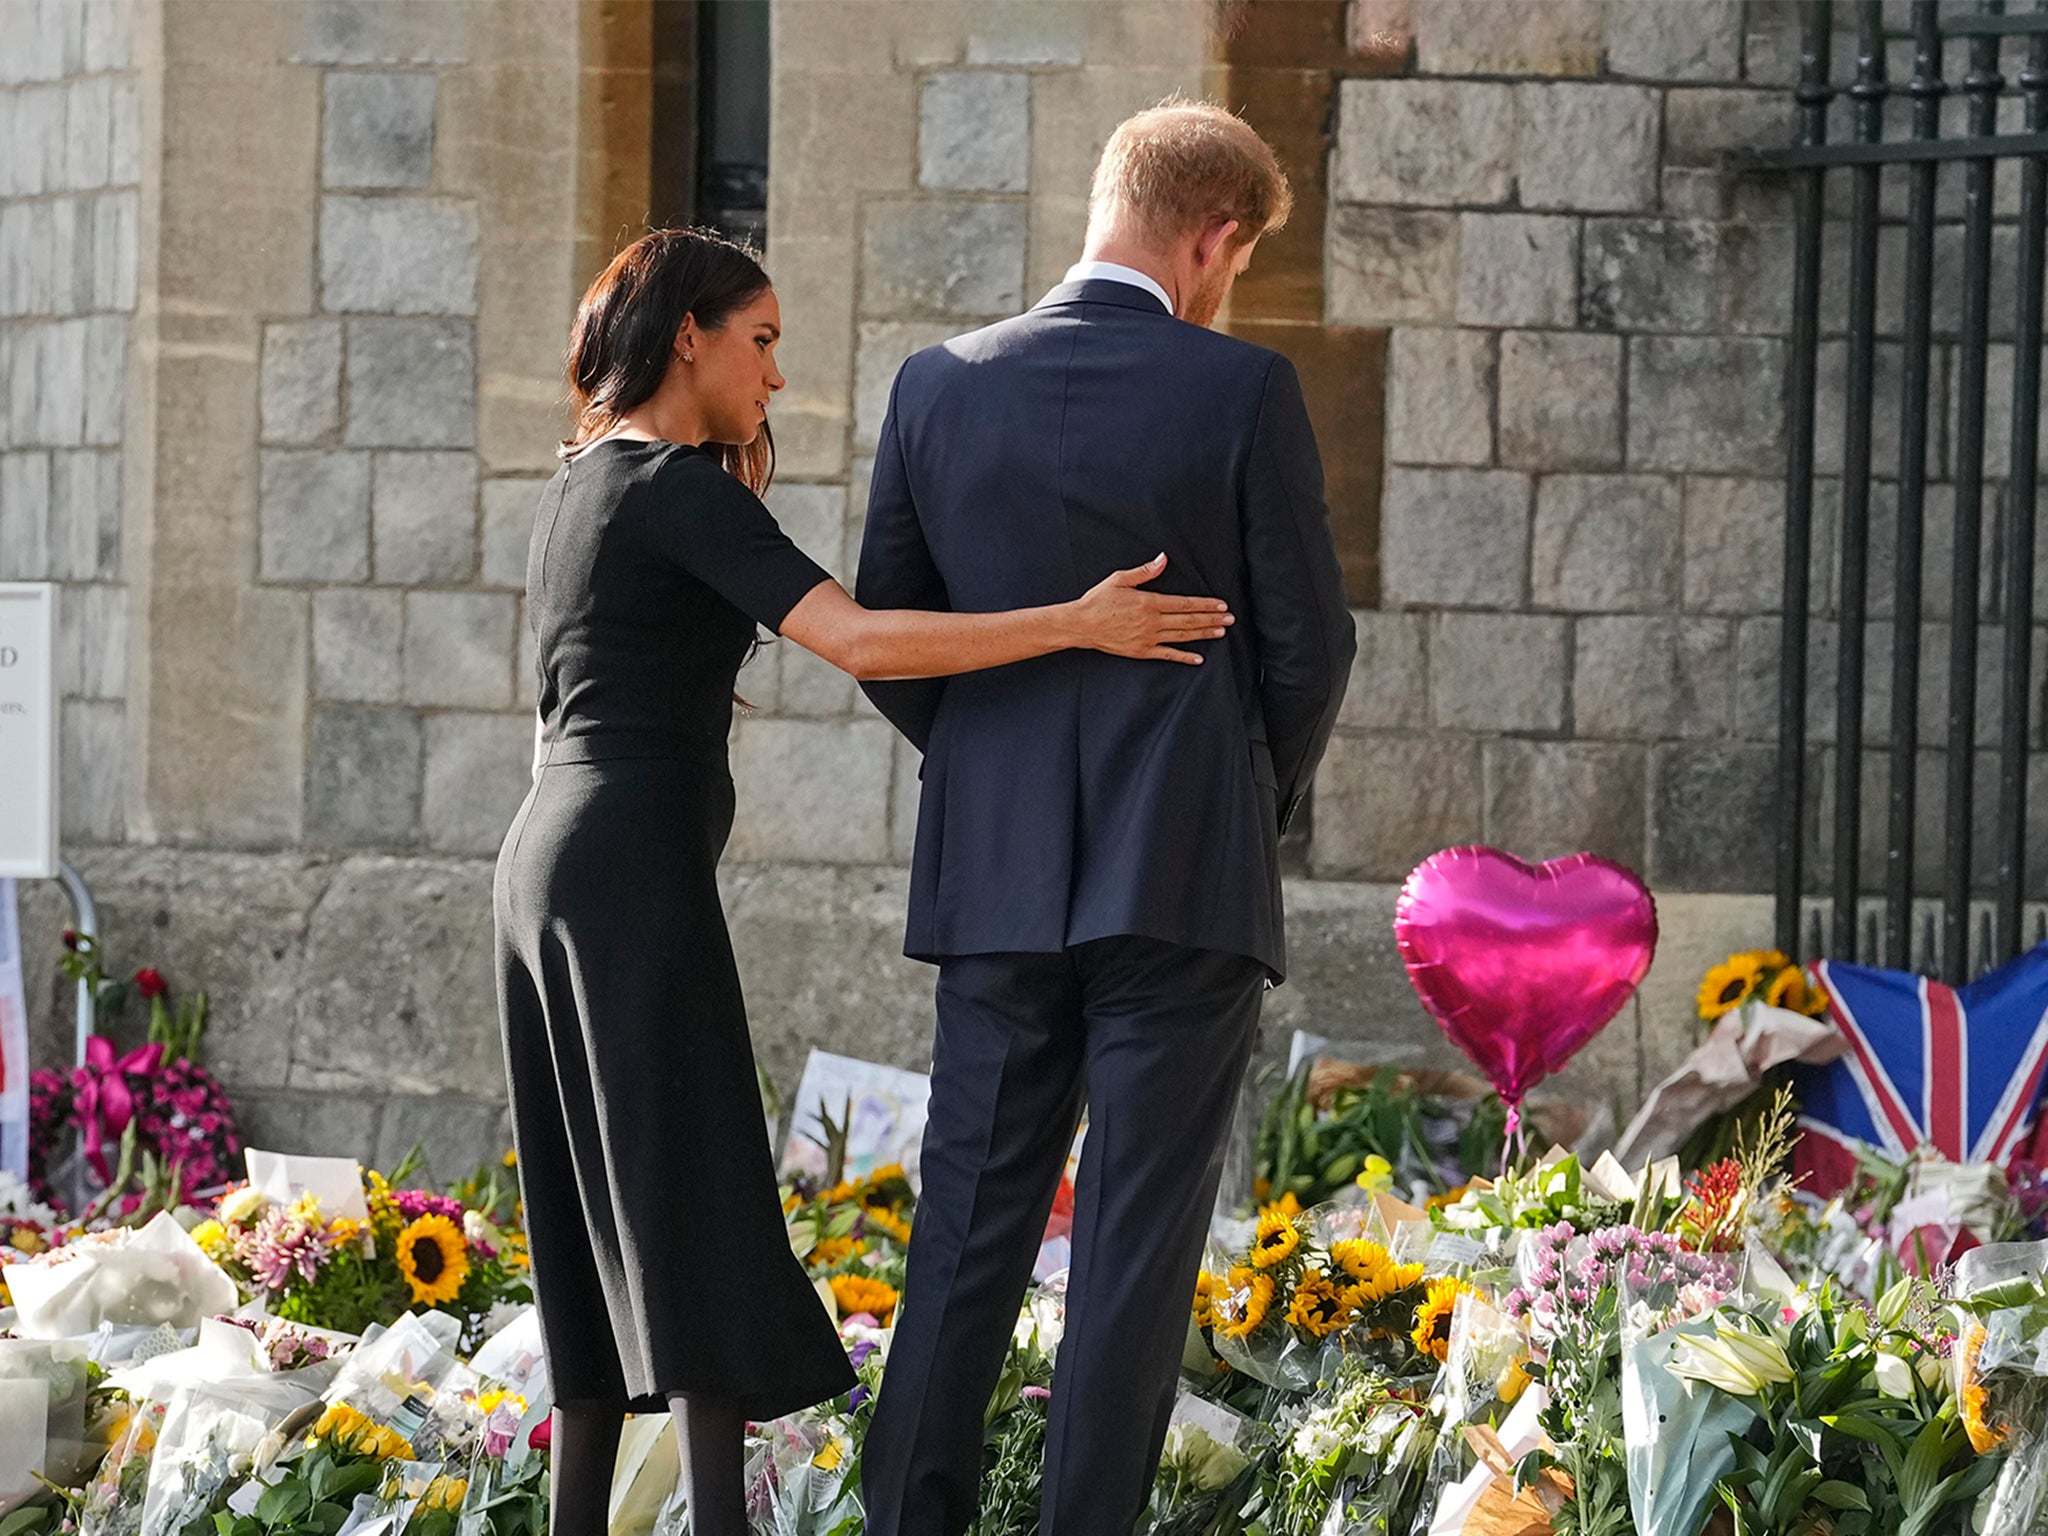 Meghan comforted her husband as they read messages together